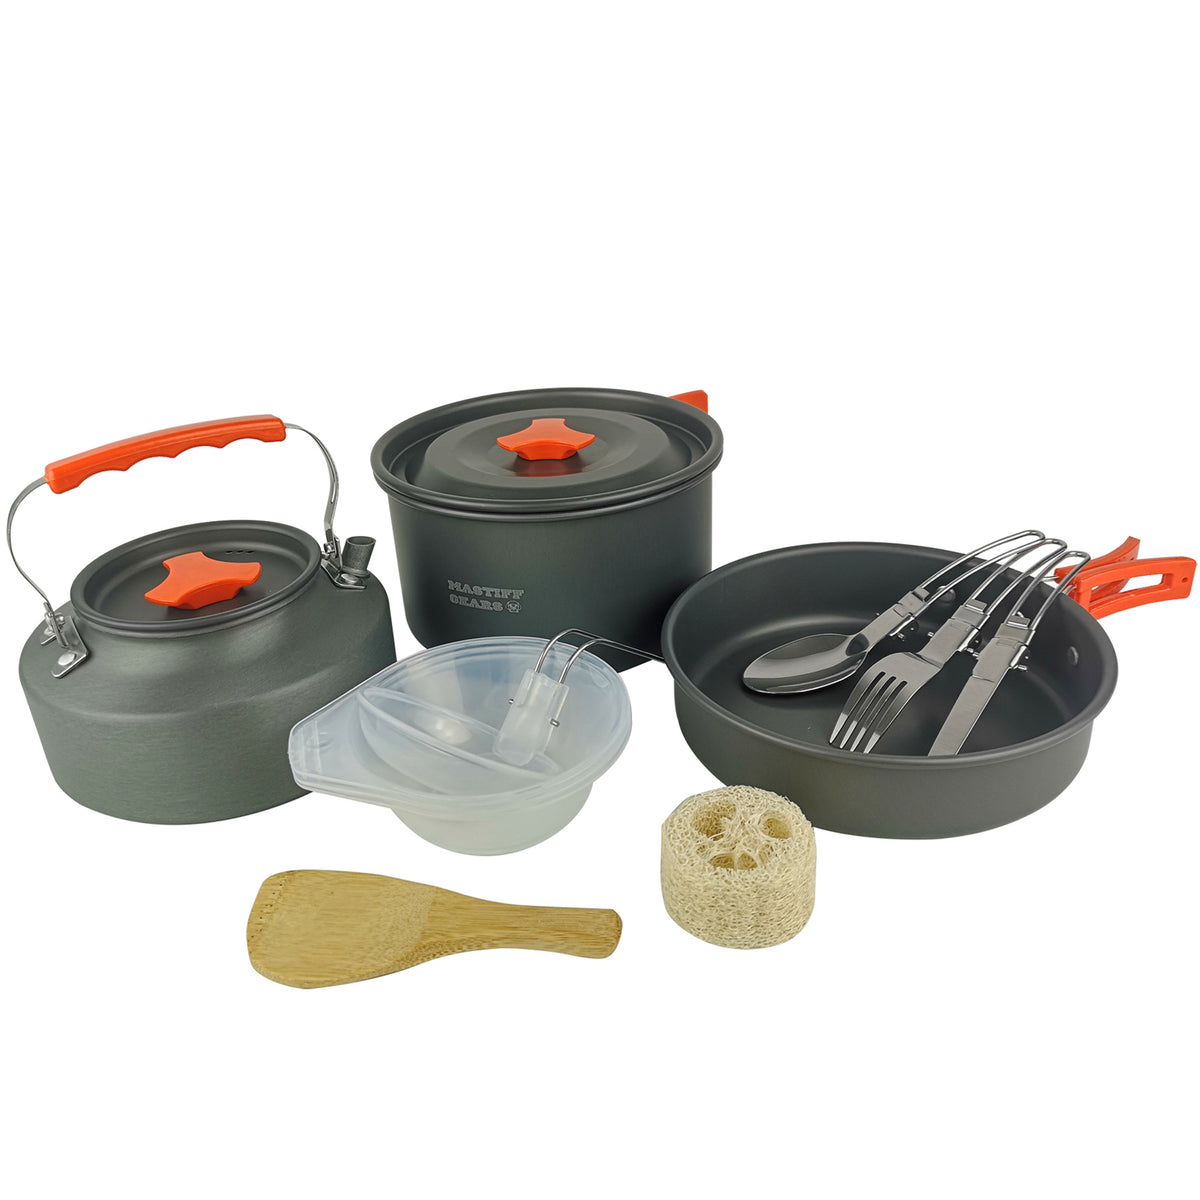 Portable Camping Cookware Set, Bundle with Coffee/Tea Pot, Camping Cutlery Set for Outdoor, Camping, Hiking, Backpacking, Picnic, BBQ